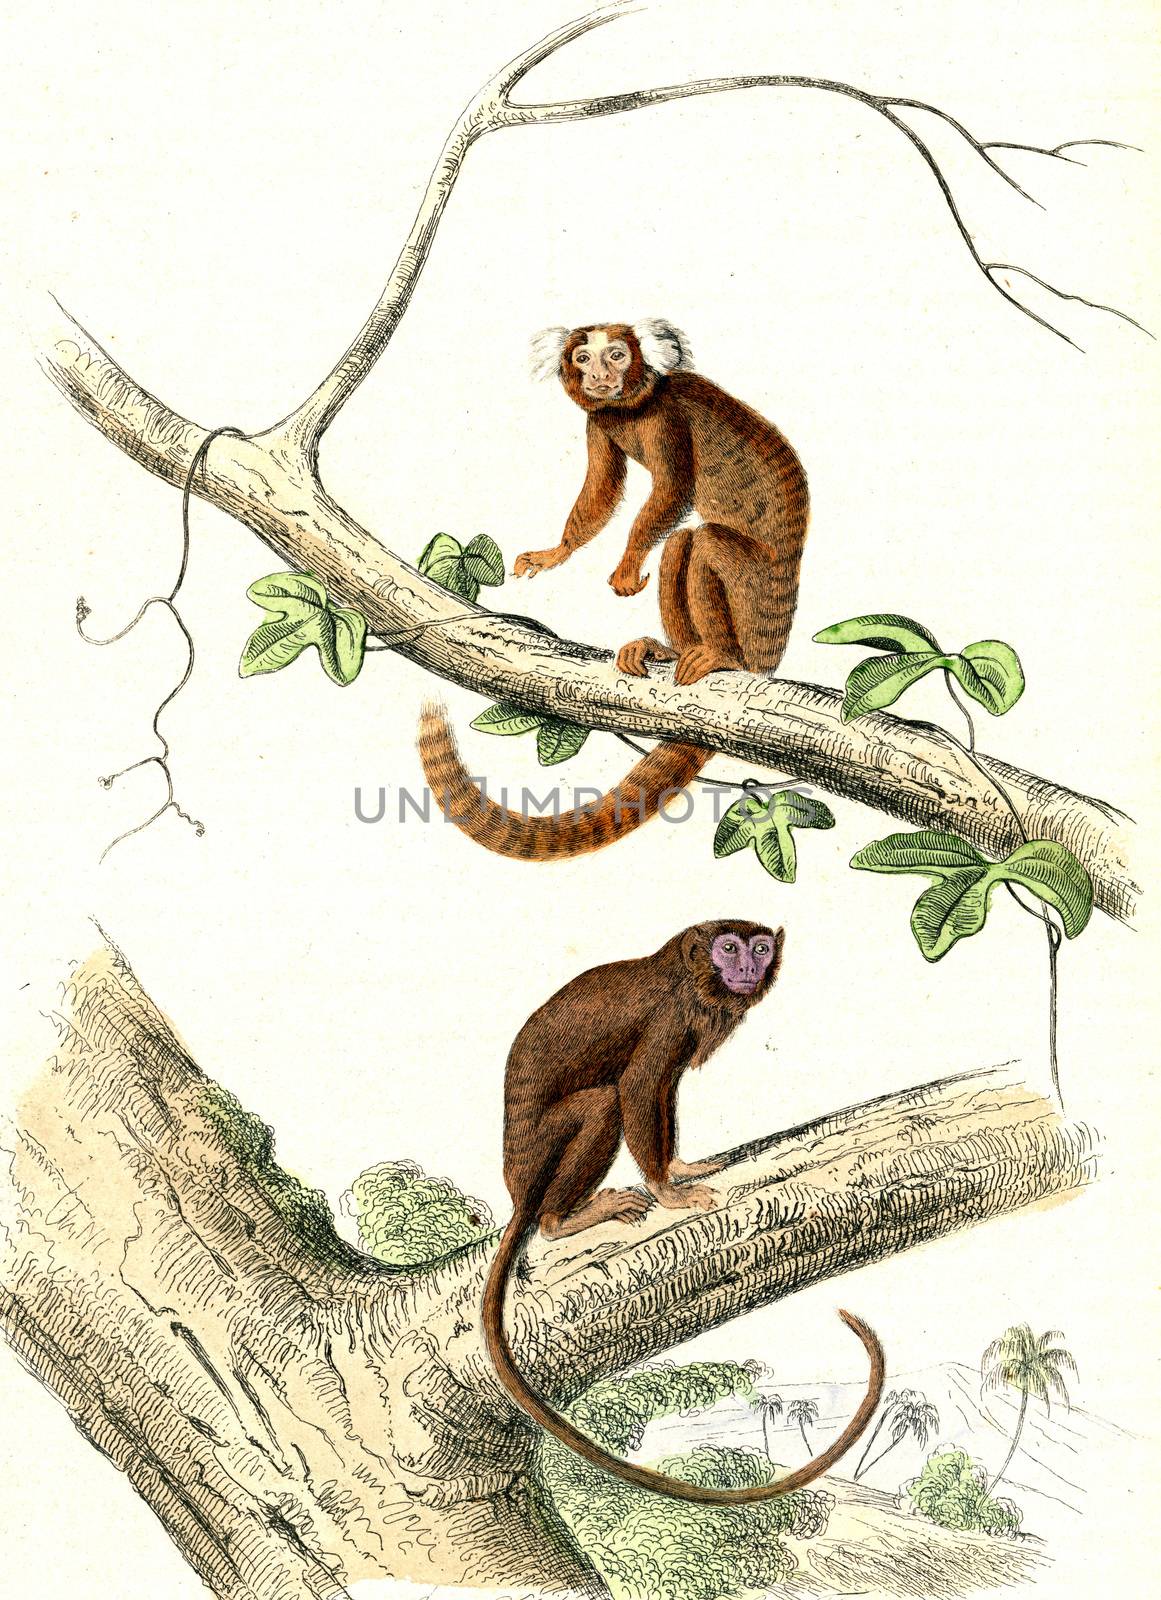 The Marmoset, The Tamarin, vintage engraved illustration. From Buffon Complete Work.
